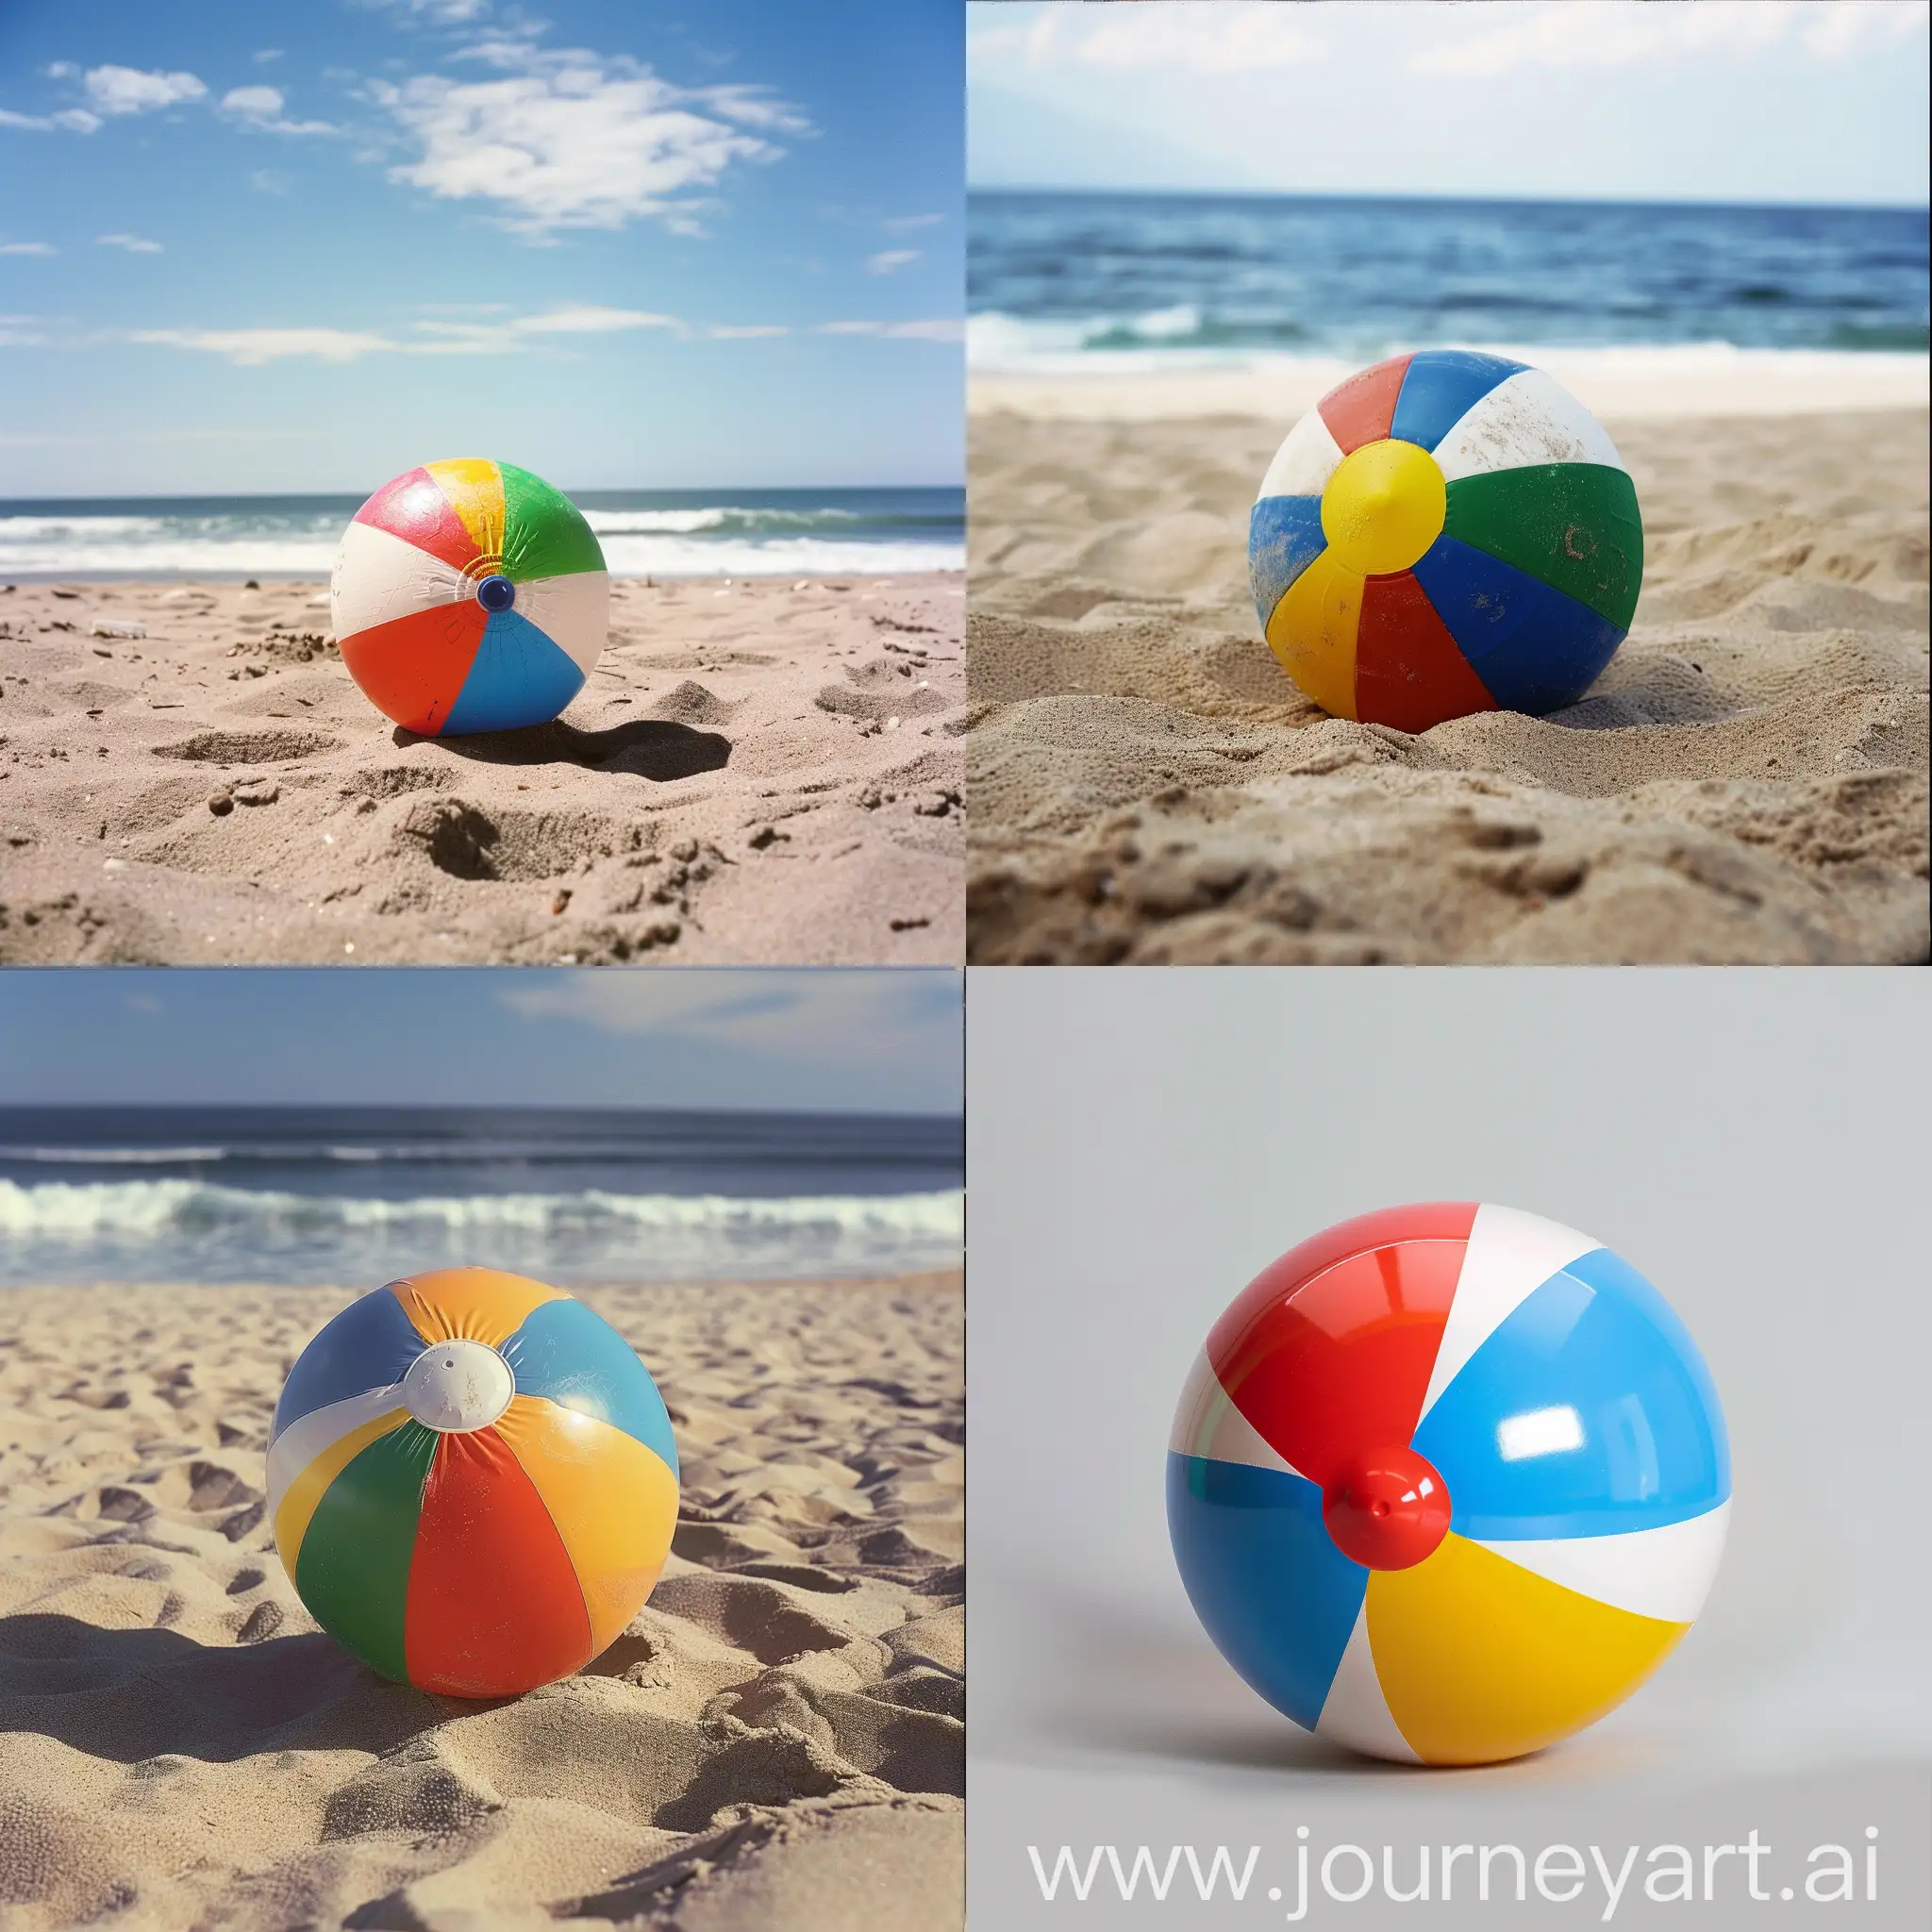 Playful-Fun-at-the-Beach-with-a-Colorful-Beach-Ball